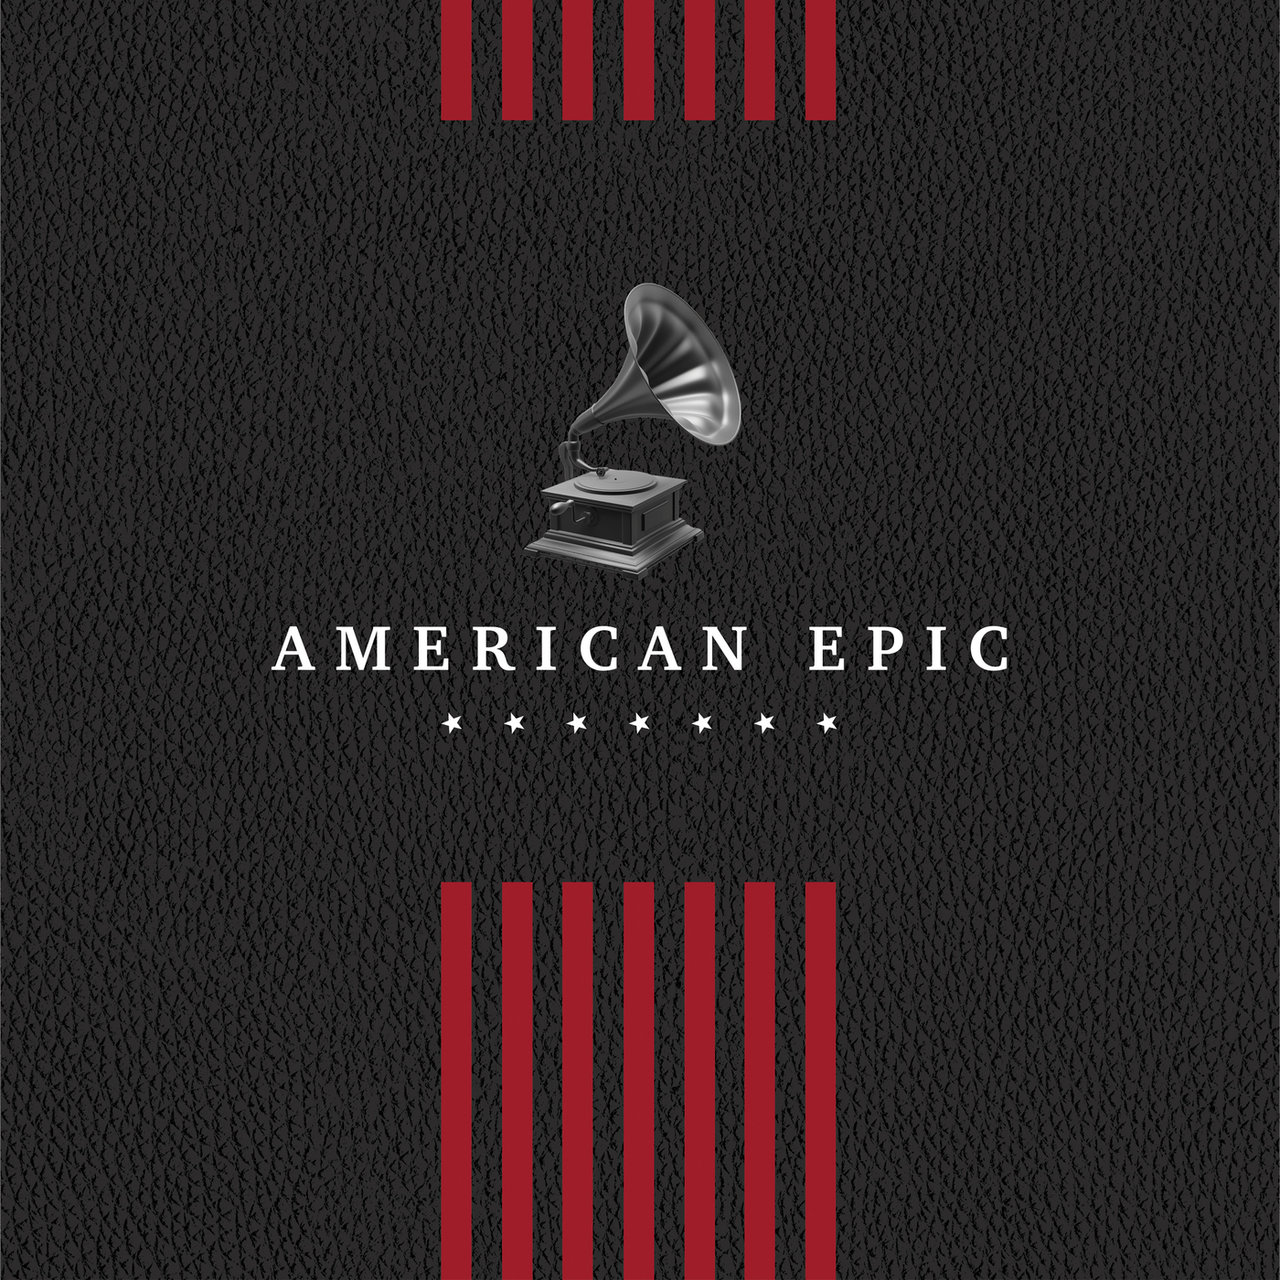 VA - American Epic: The Collection (2017) [FLAC 24bit/96kHz]